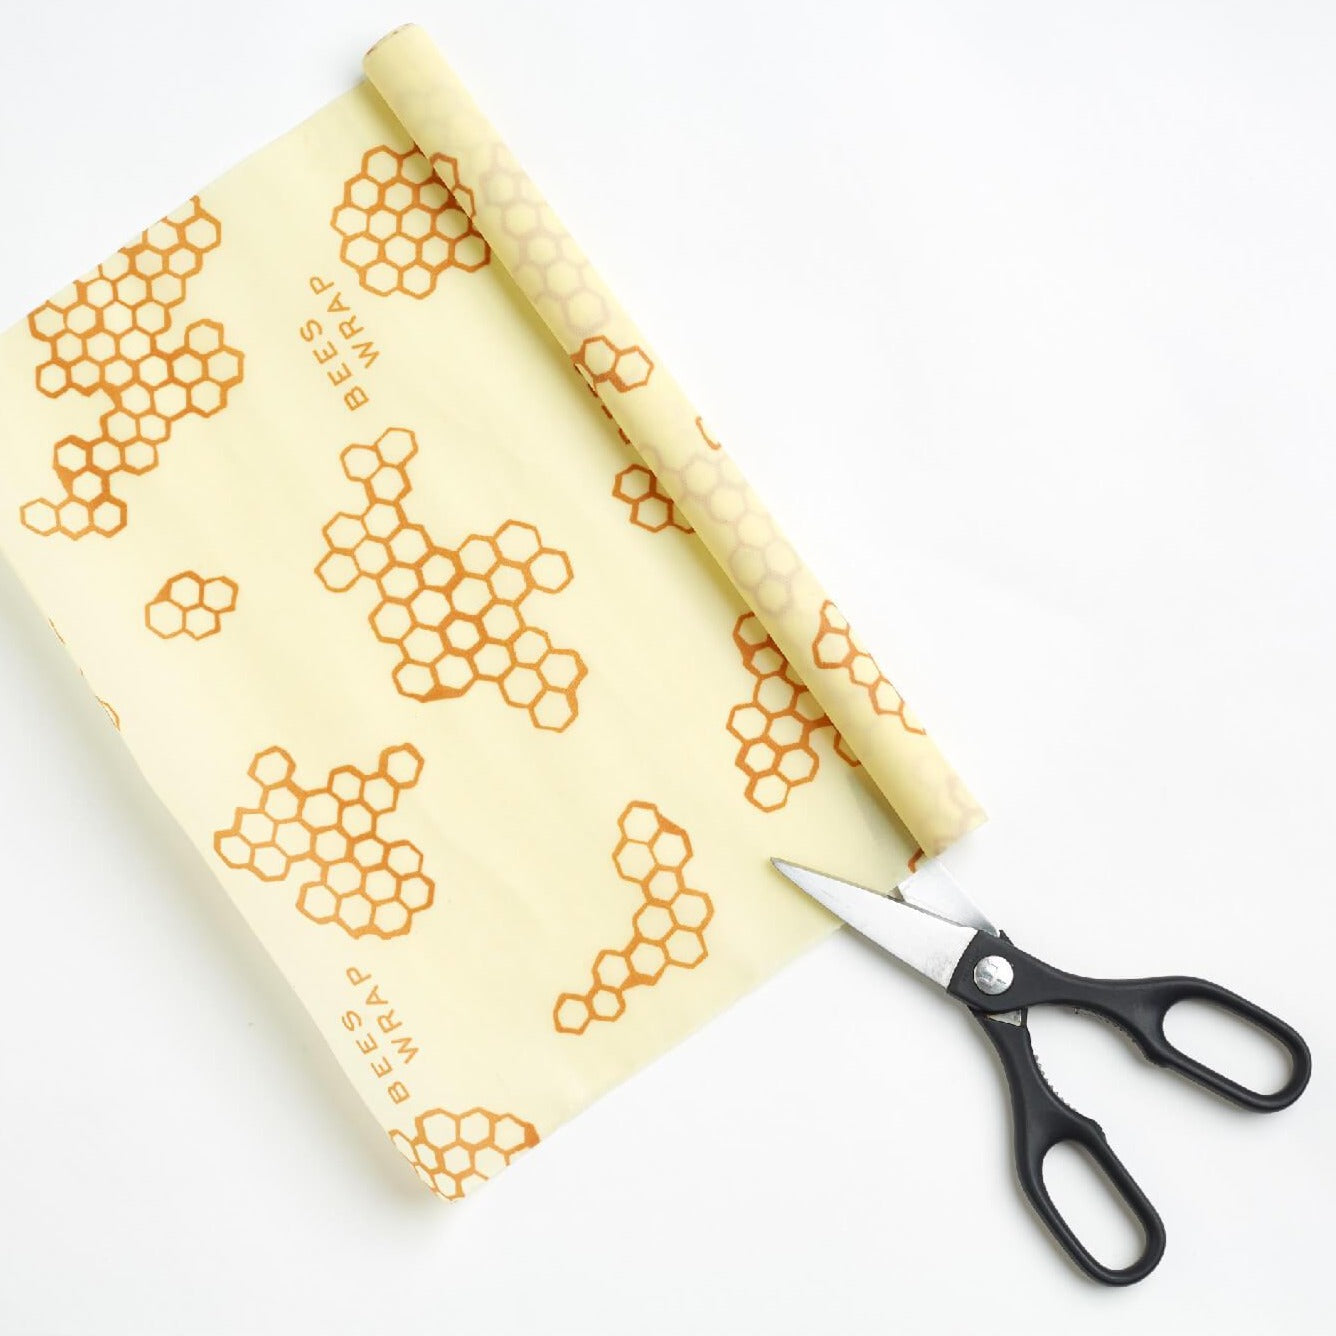 XXL beeswax wrap being cut with scissors